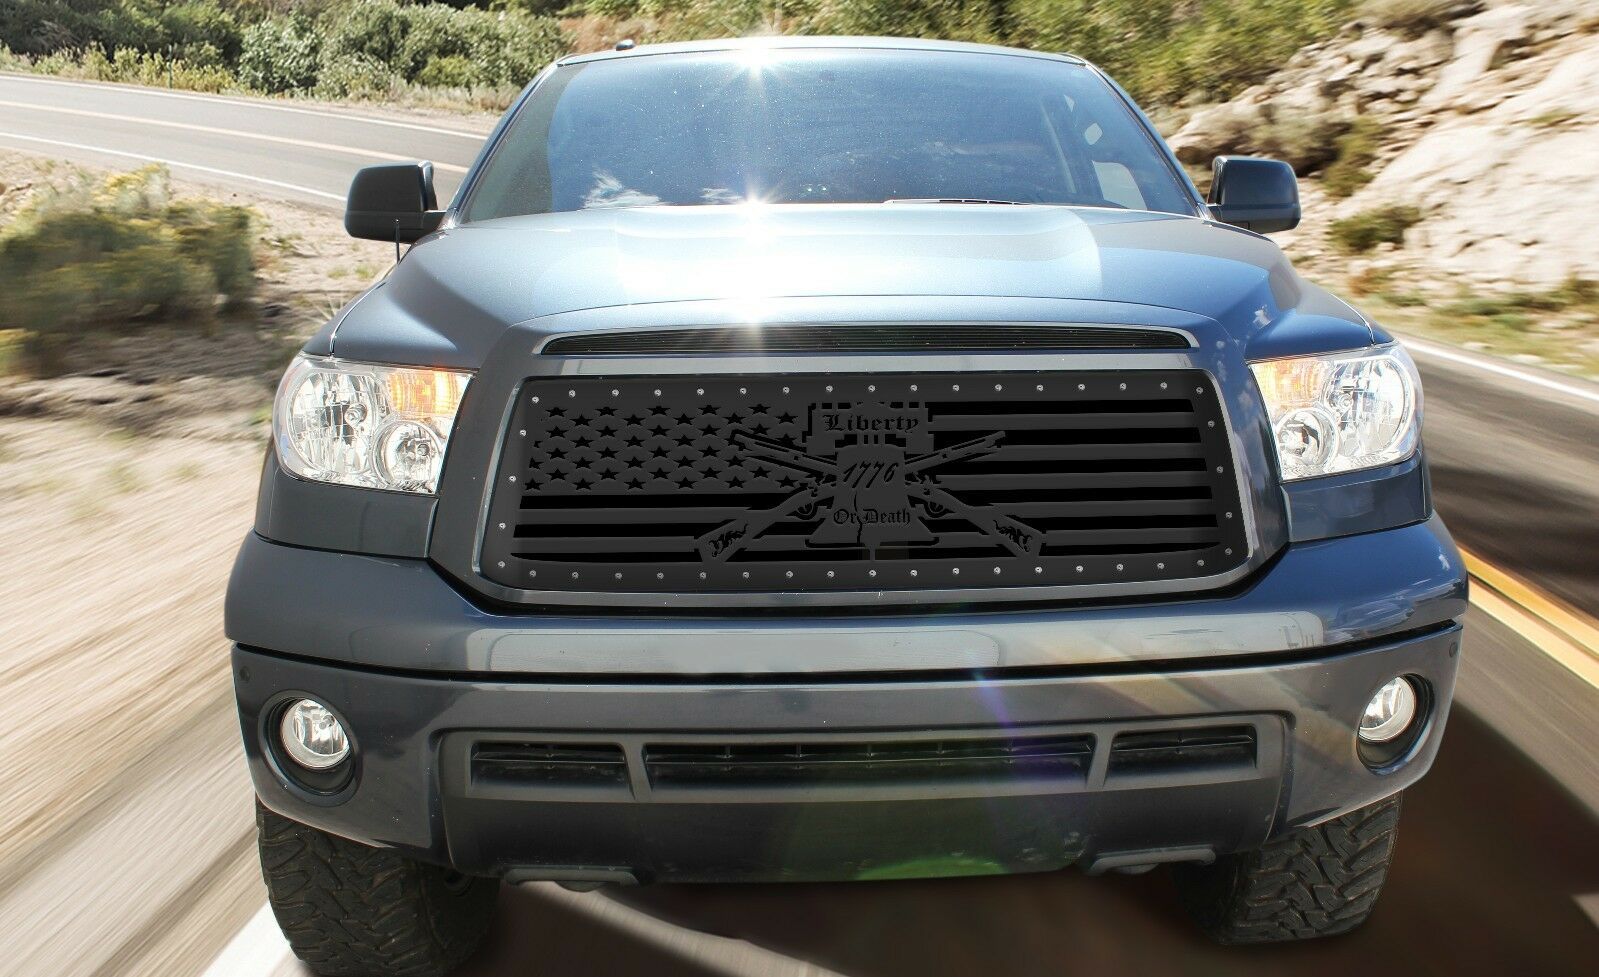 Steel Aftermarket Grille Kit Fit Toyota Tundra 2010 2013 Grill Liberty